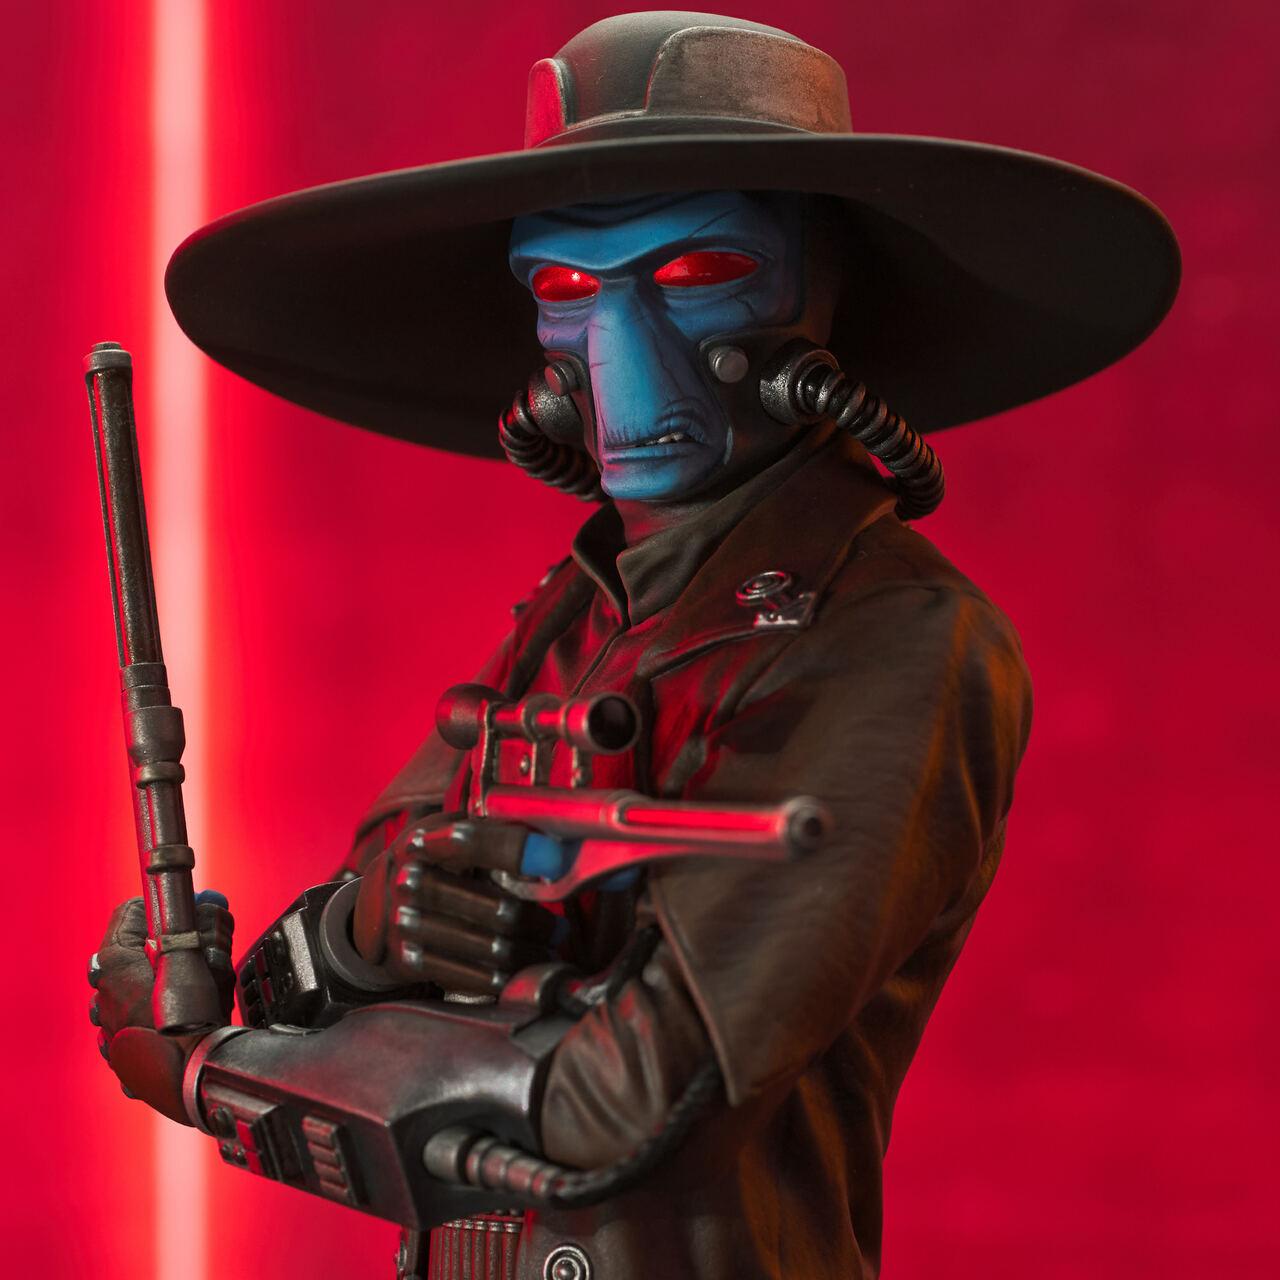 Star wars the clone wars gentle giant cad bane buste jawascave6